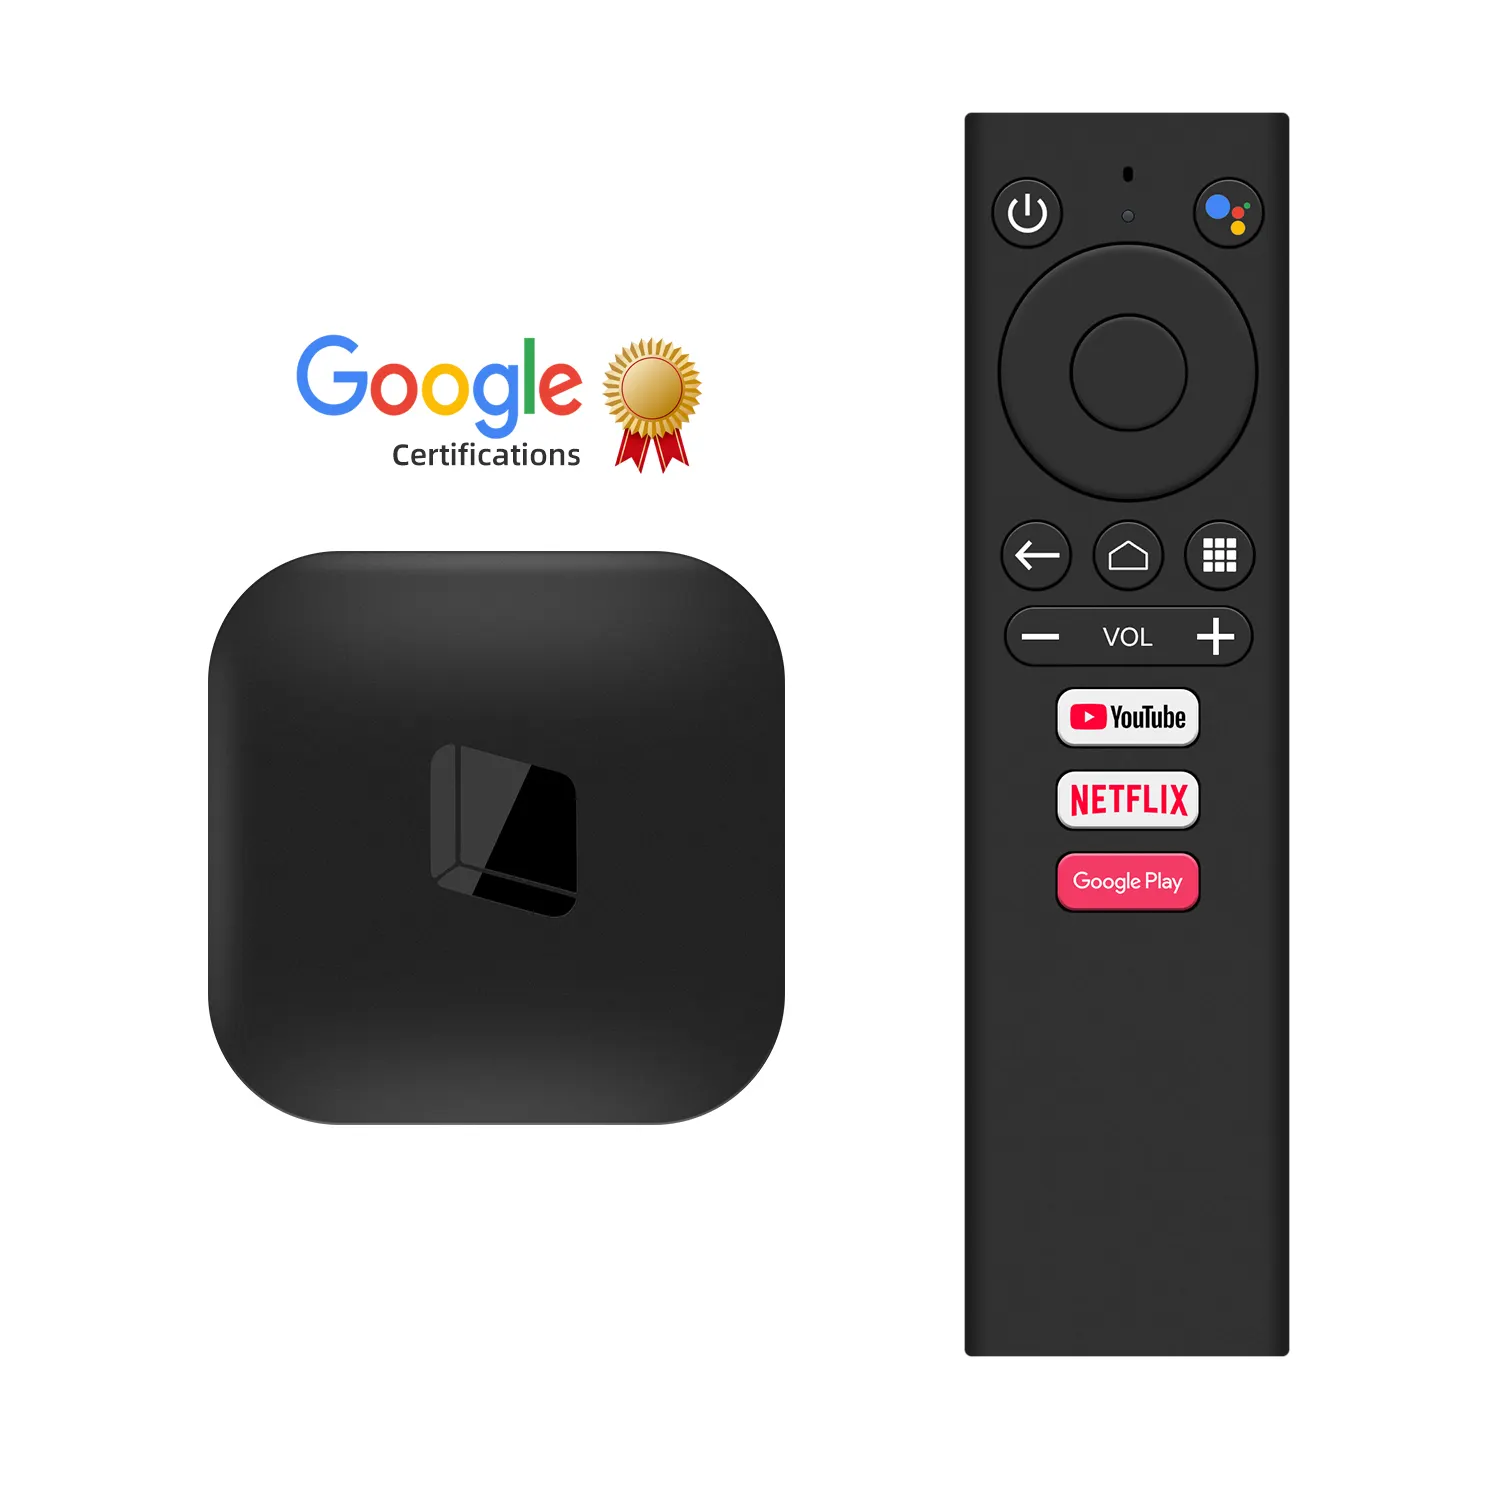 Android Smart Set Top Box google certified dual wifi 2.4g 5g quad core Mini google Android TV Box